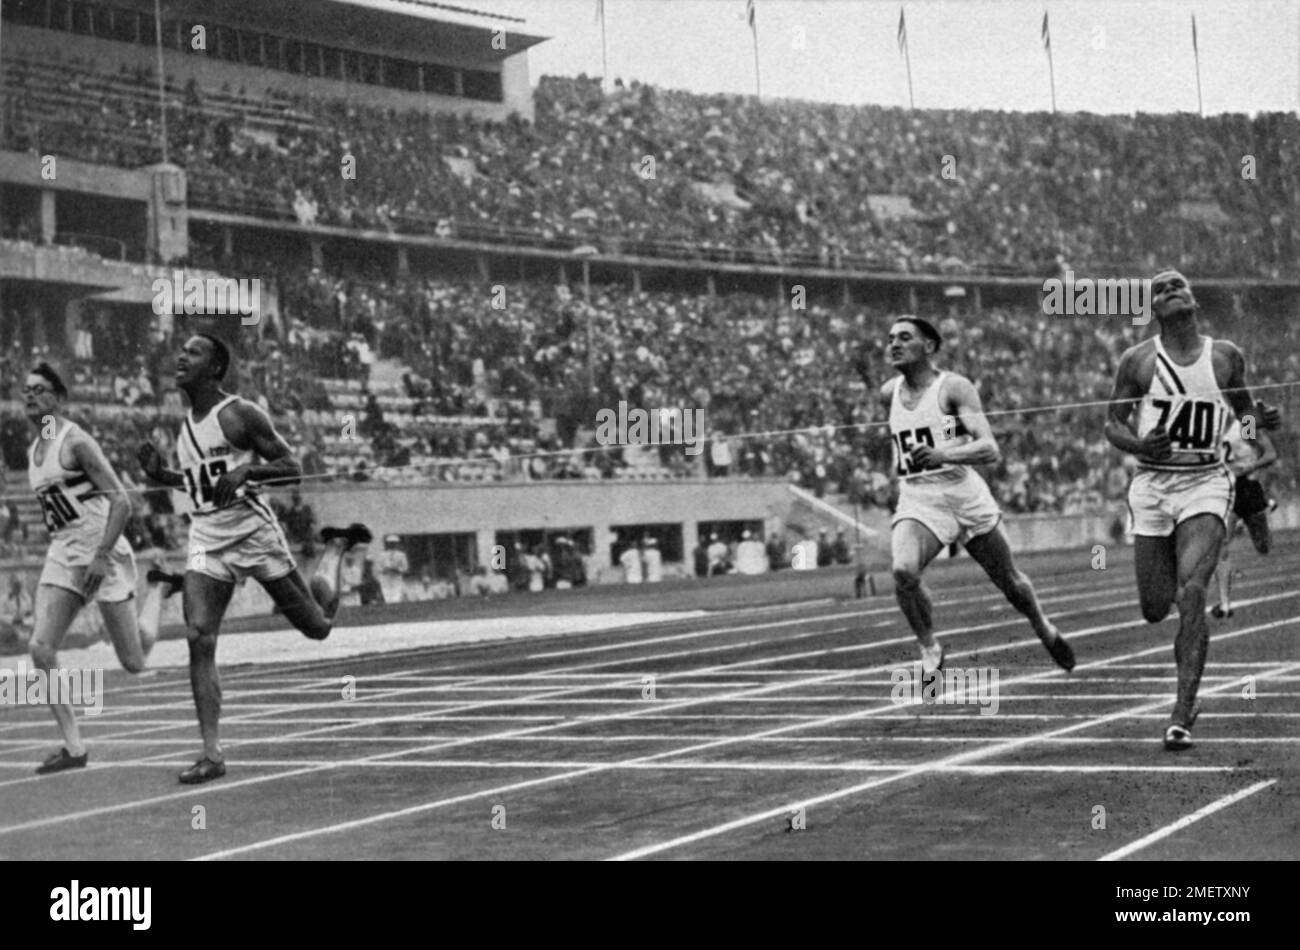 At the finish of the 400 m run, Archie Williams, USA (2nd from left) wins ahead of Brown, Great Britain and Lu Valle, USA Stock Photo